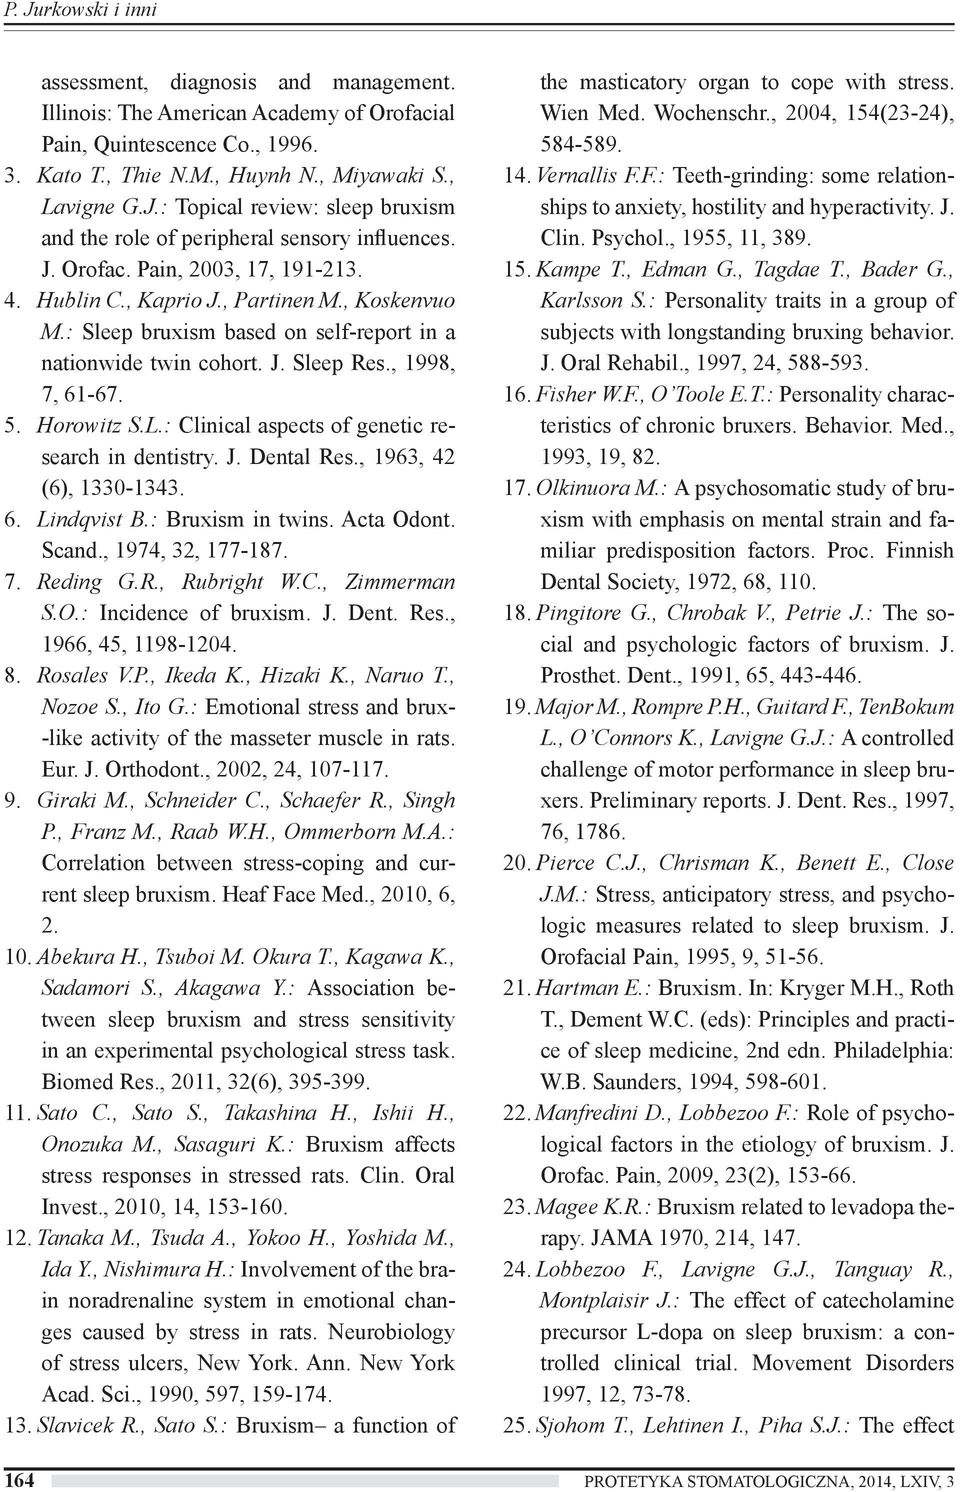 : Clinical aspects of genetic research in dentistry. J. Dental Res., 1963, 42 (6), 1330-1343. 6. Lindqvist B.: Bruxism in twins. Acta Odont. Scand., 1974, 32, 177-187. 7. Reding G.R., Rubright W.C., Zimmerman S.